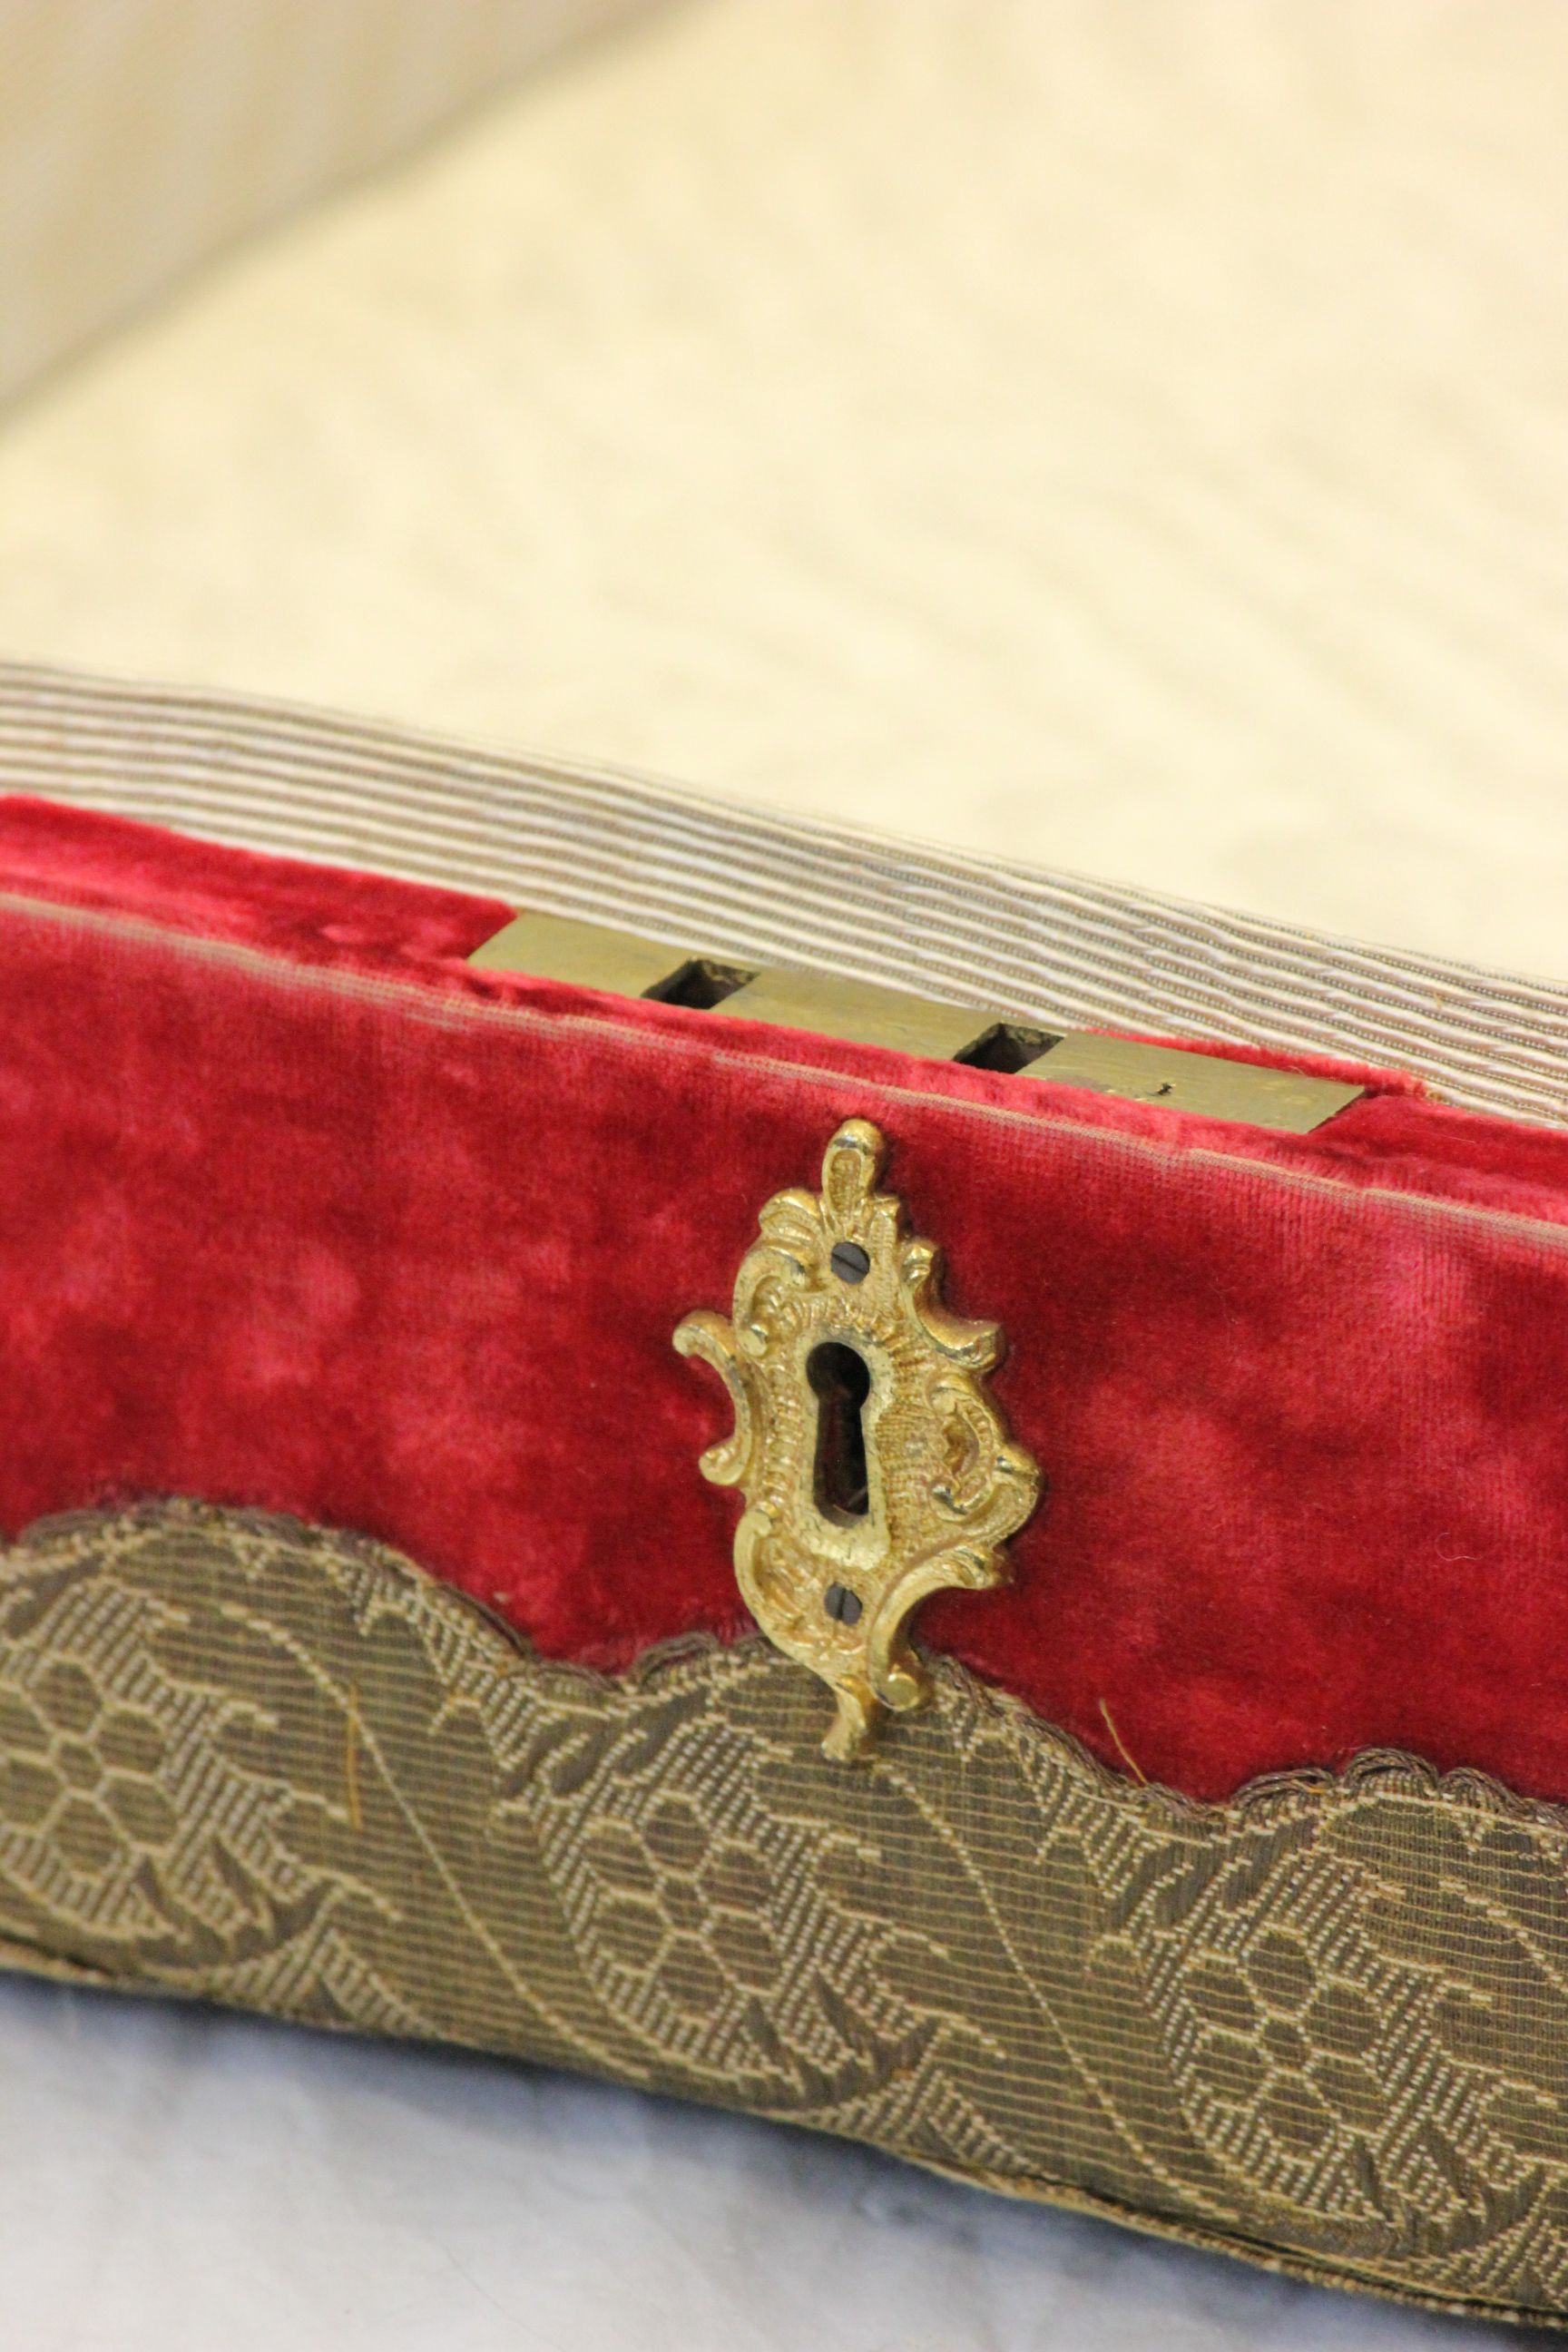 Oriental silk lined box with Embroidered decoration - Image 2 of 2